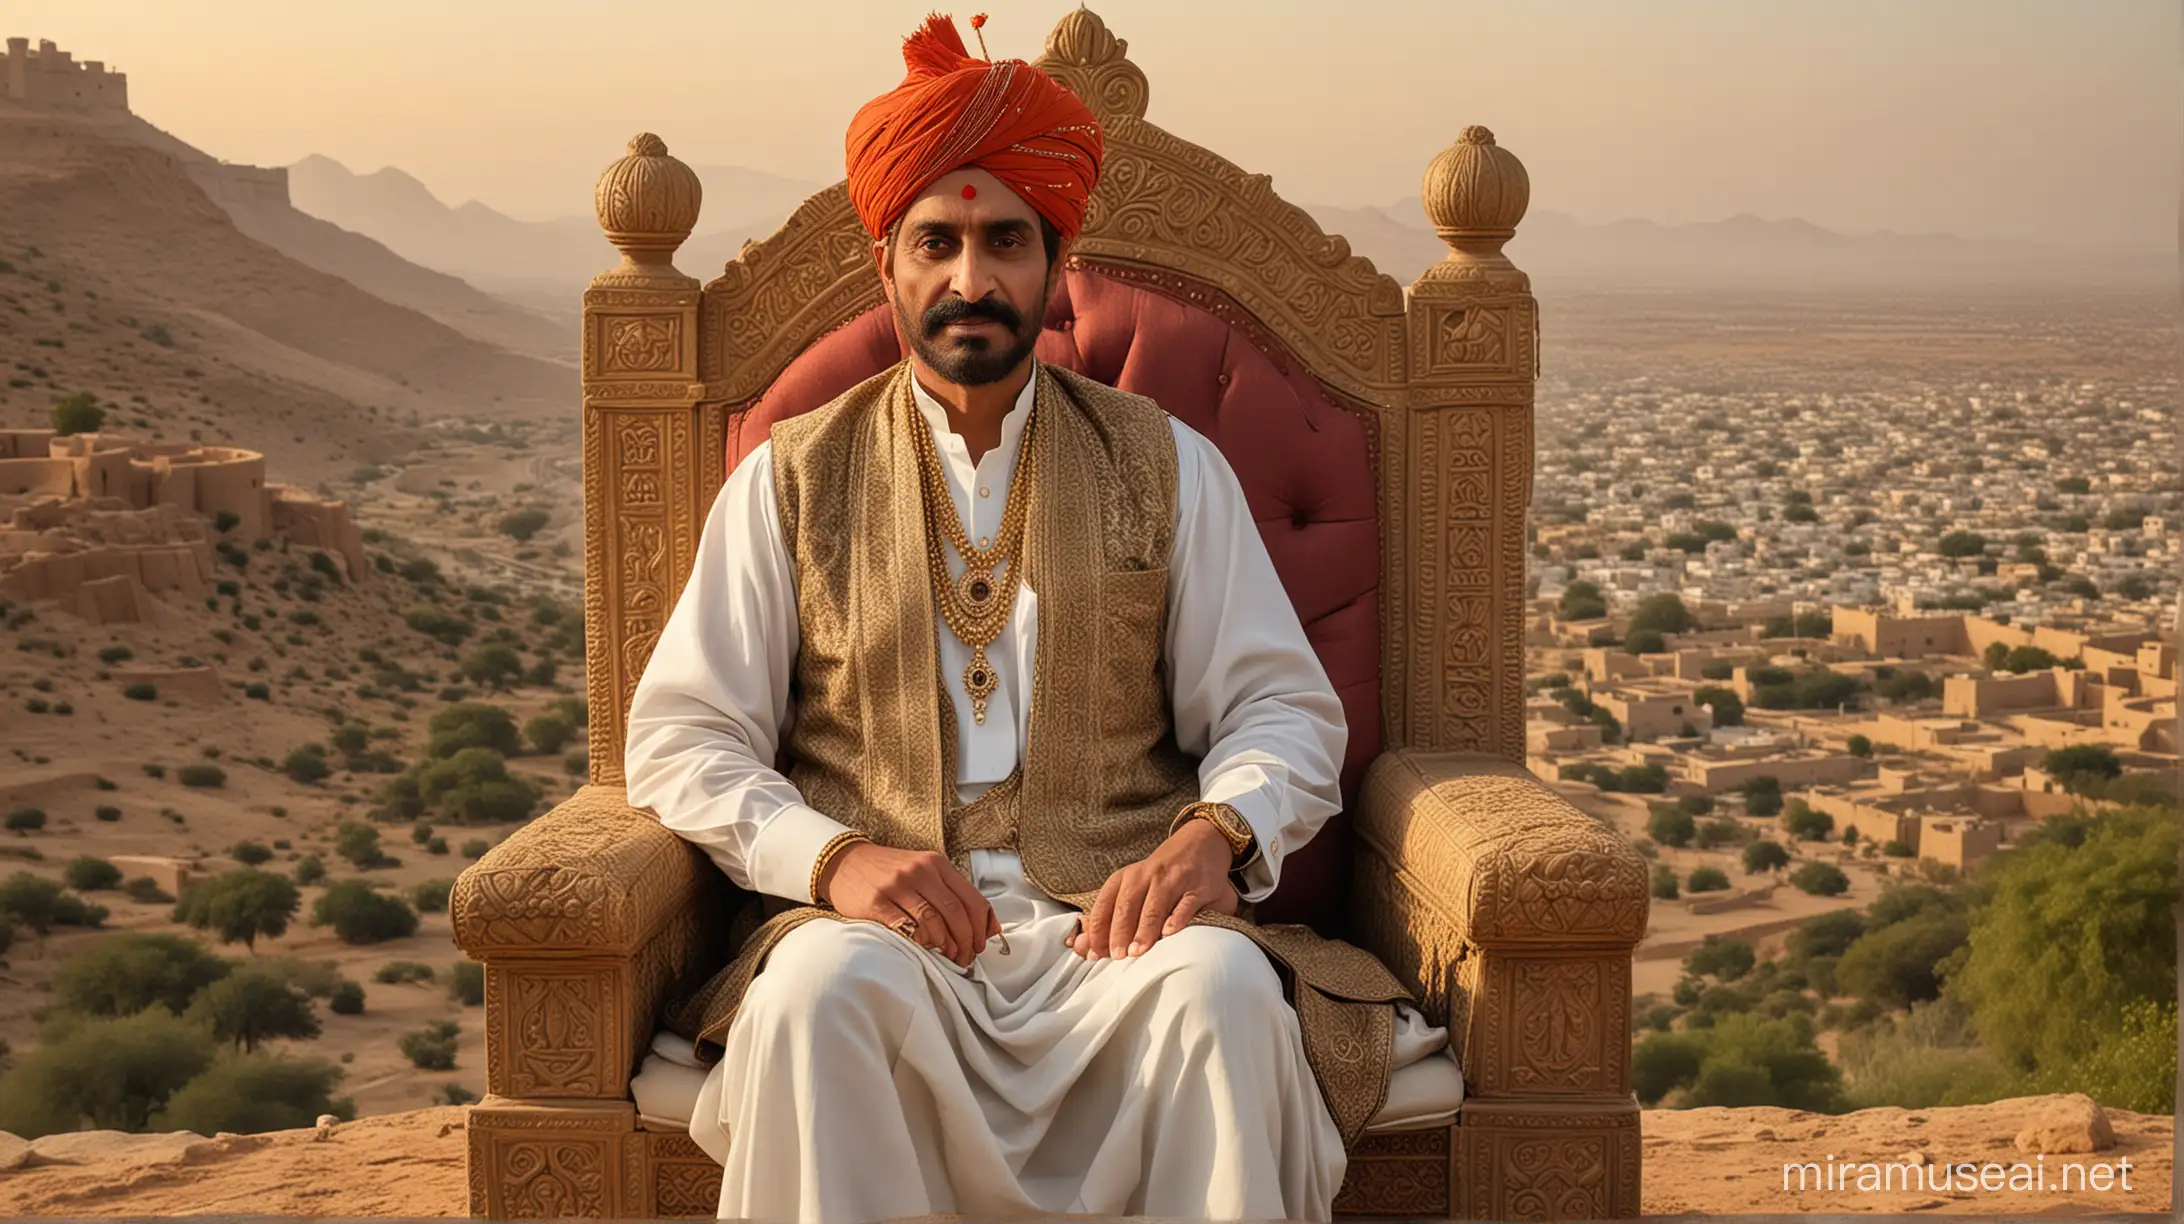 Create an image capturing the essence of Raja Dahir, the last Hindu ruler of Sindh, known for his valor and resilience in defending his kingdom against the Arab invasion. Depict him in regal attire, seated on his throne, with a backdrop of the Sindhi landscape or an ancient fort, exuding strength and dignity. Ensure the image reflects his historical significance and the cultural richness of the region during his reign